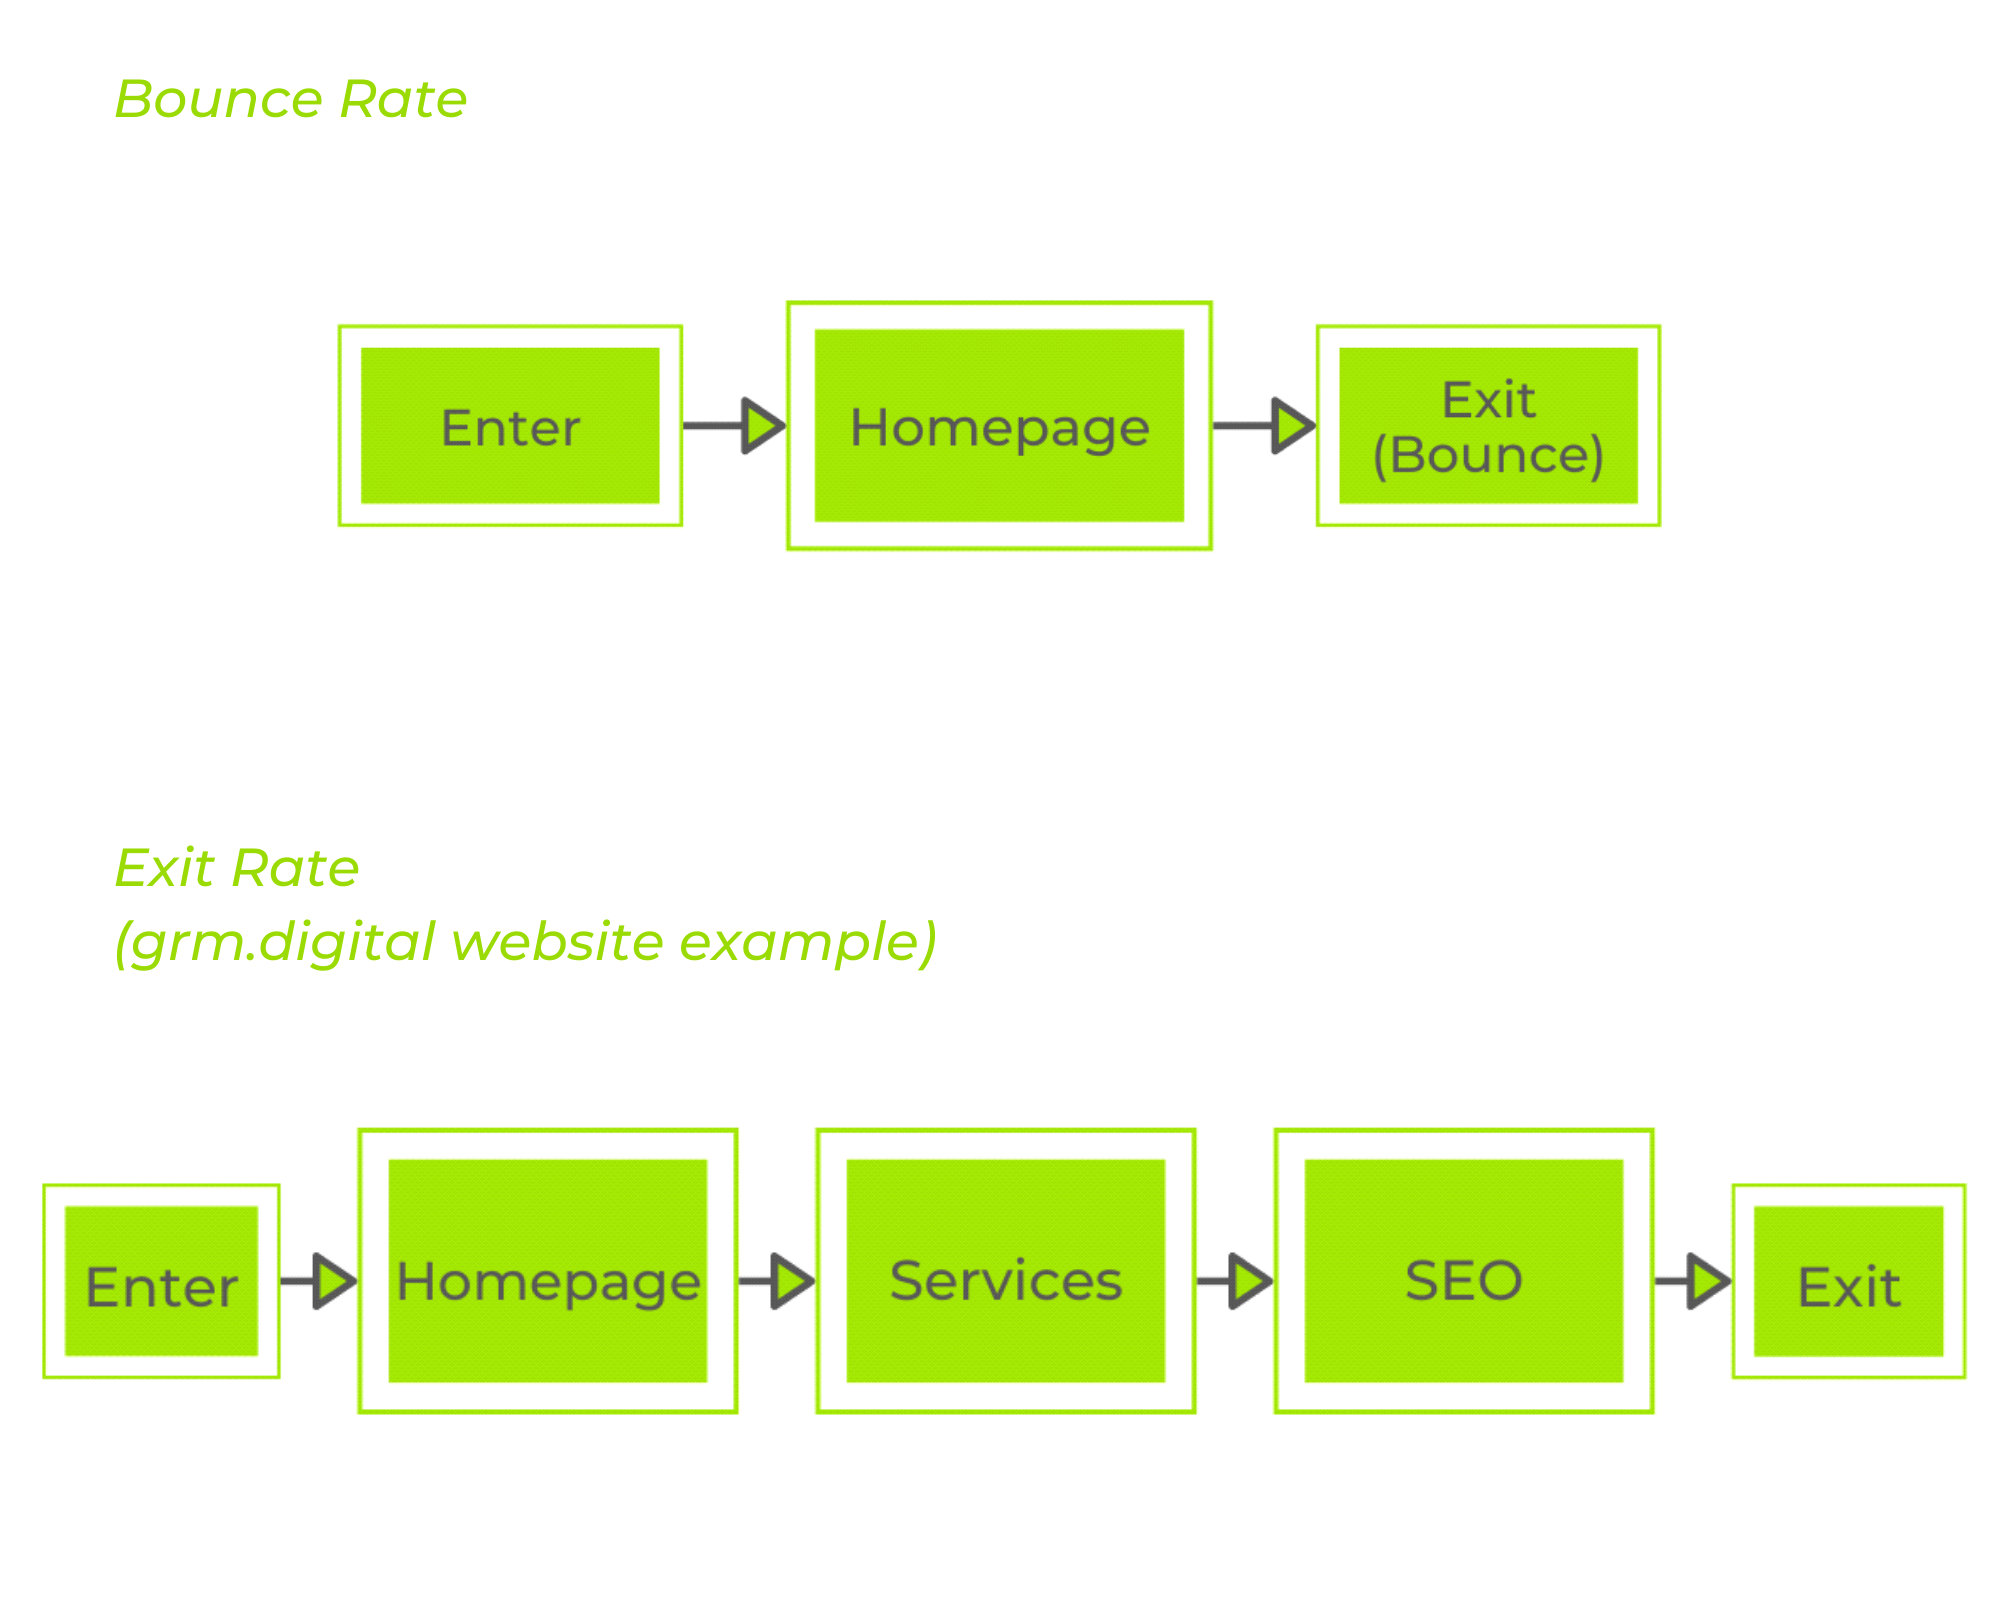 Visual representation of the difference between bounce rate and exit rate.